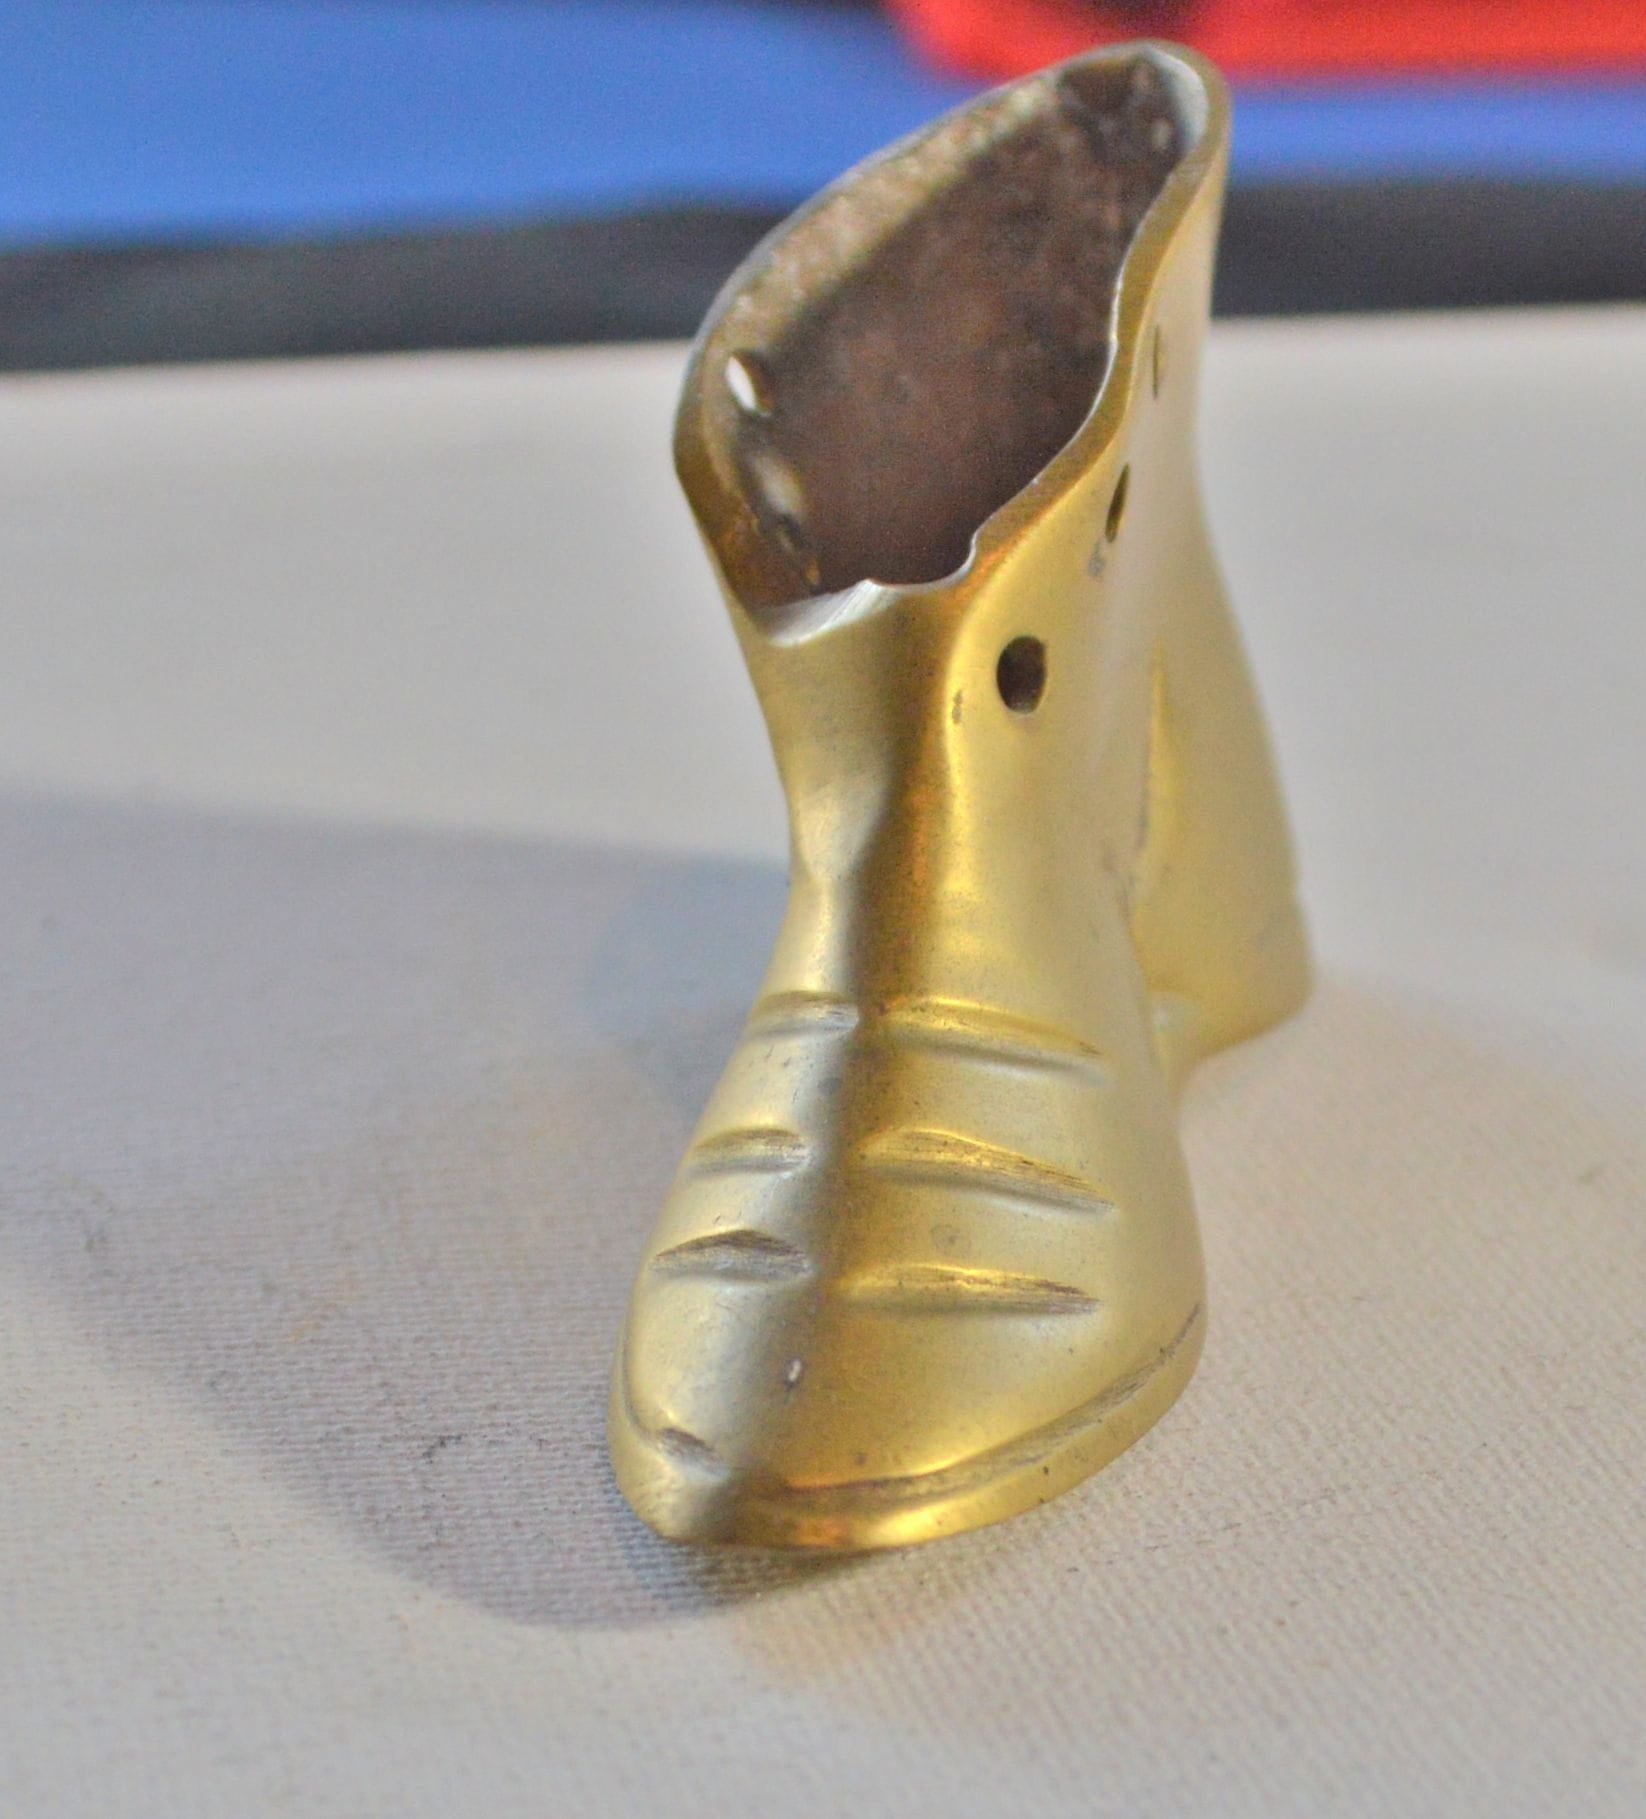 BRASS BOOT(PREVIOUSLY OWNED) GOOD CONDITION - TMD167207